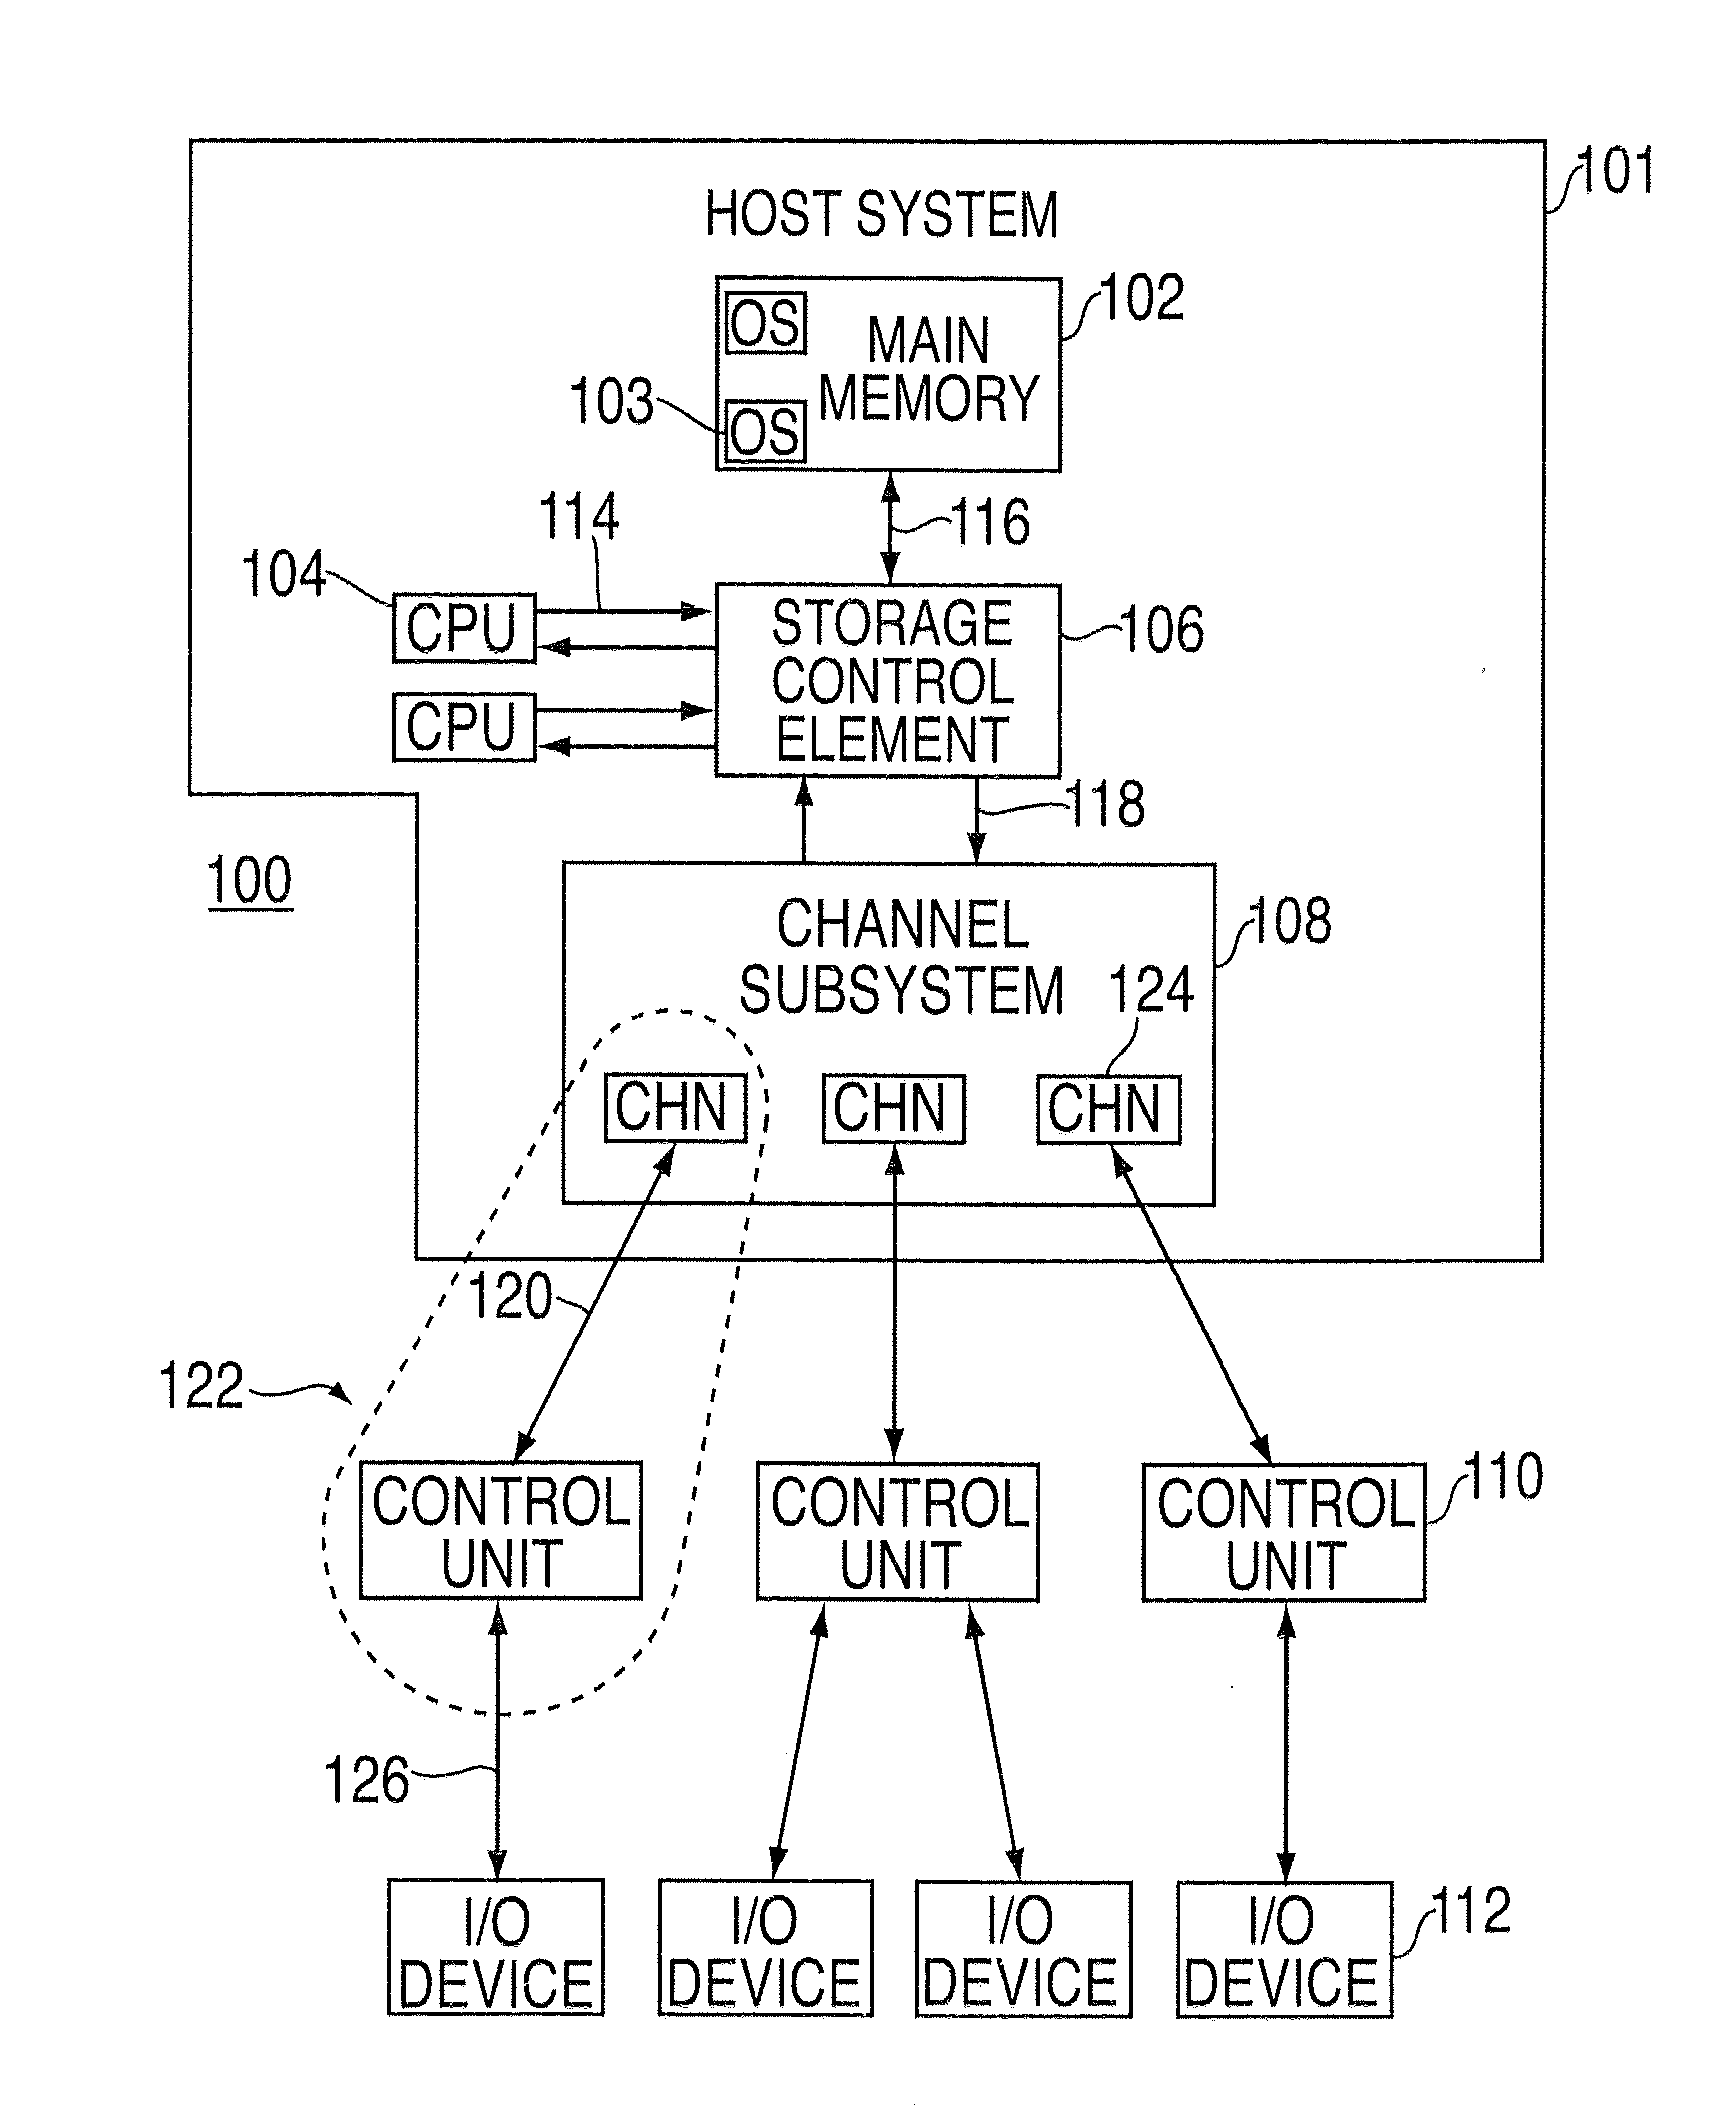 Processing of data to suspend operations in an input/output processing log-out system